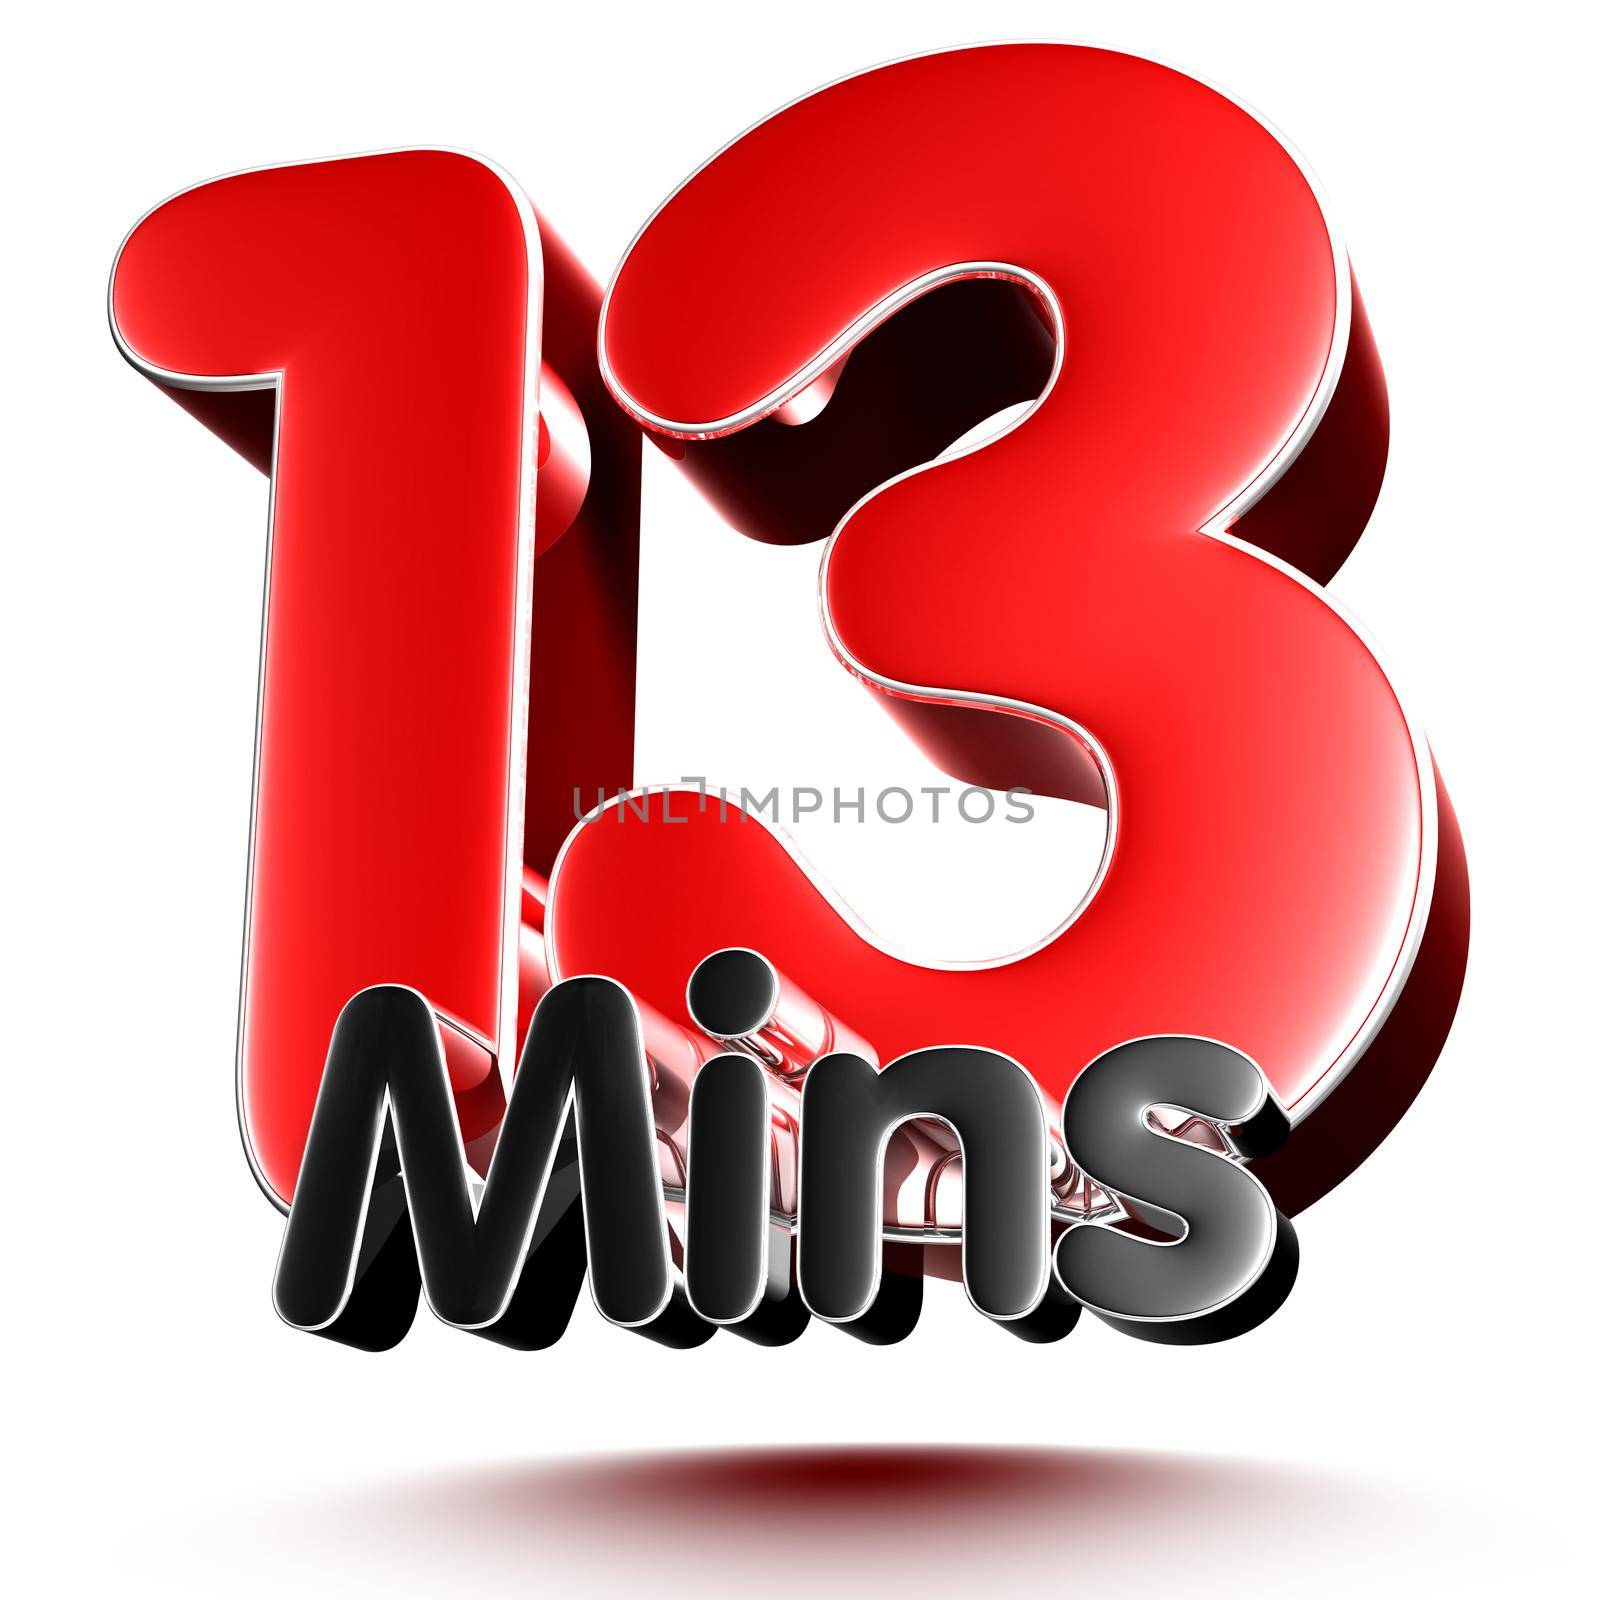 13 mins isolated on white background illustration 3D rendering with clipping path.